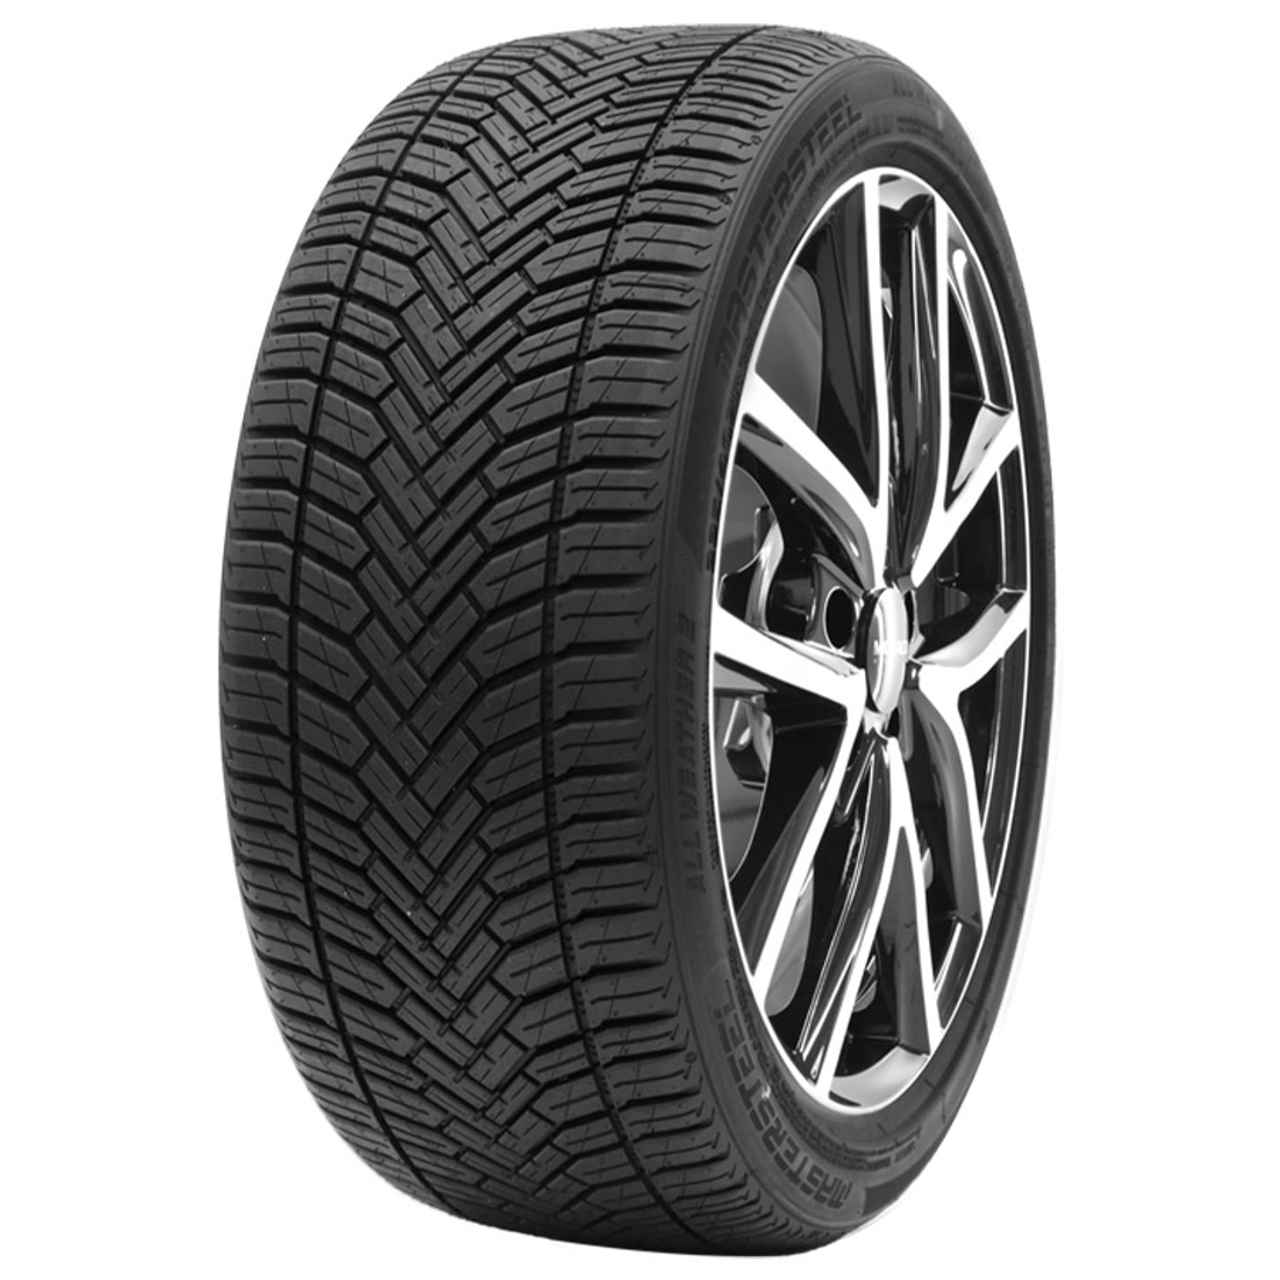 MASTERSTEEL ALL WEATHER 2 215/45R16 90V BSW